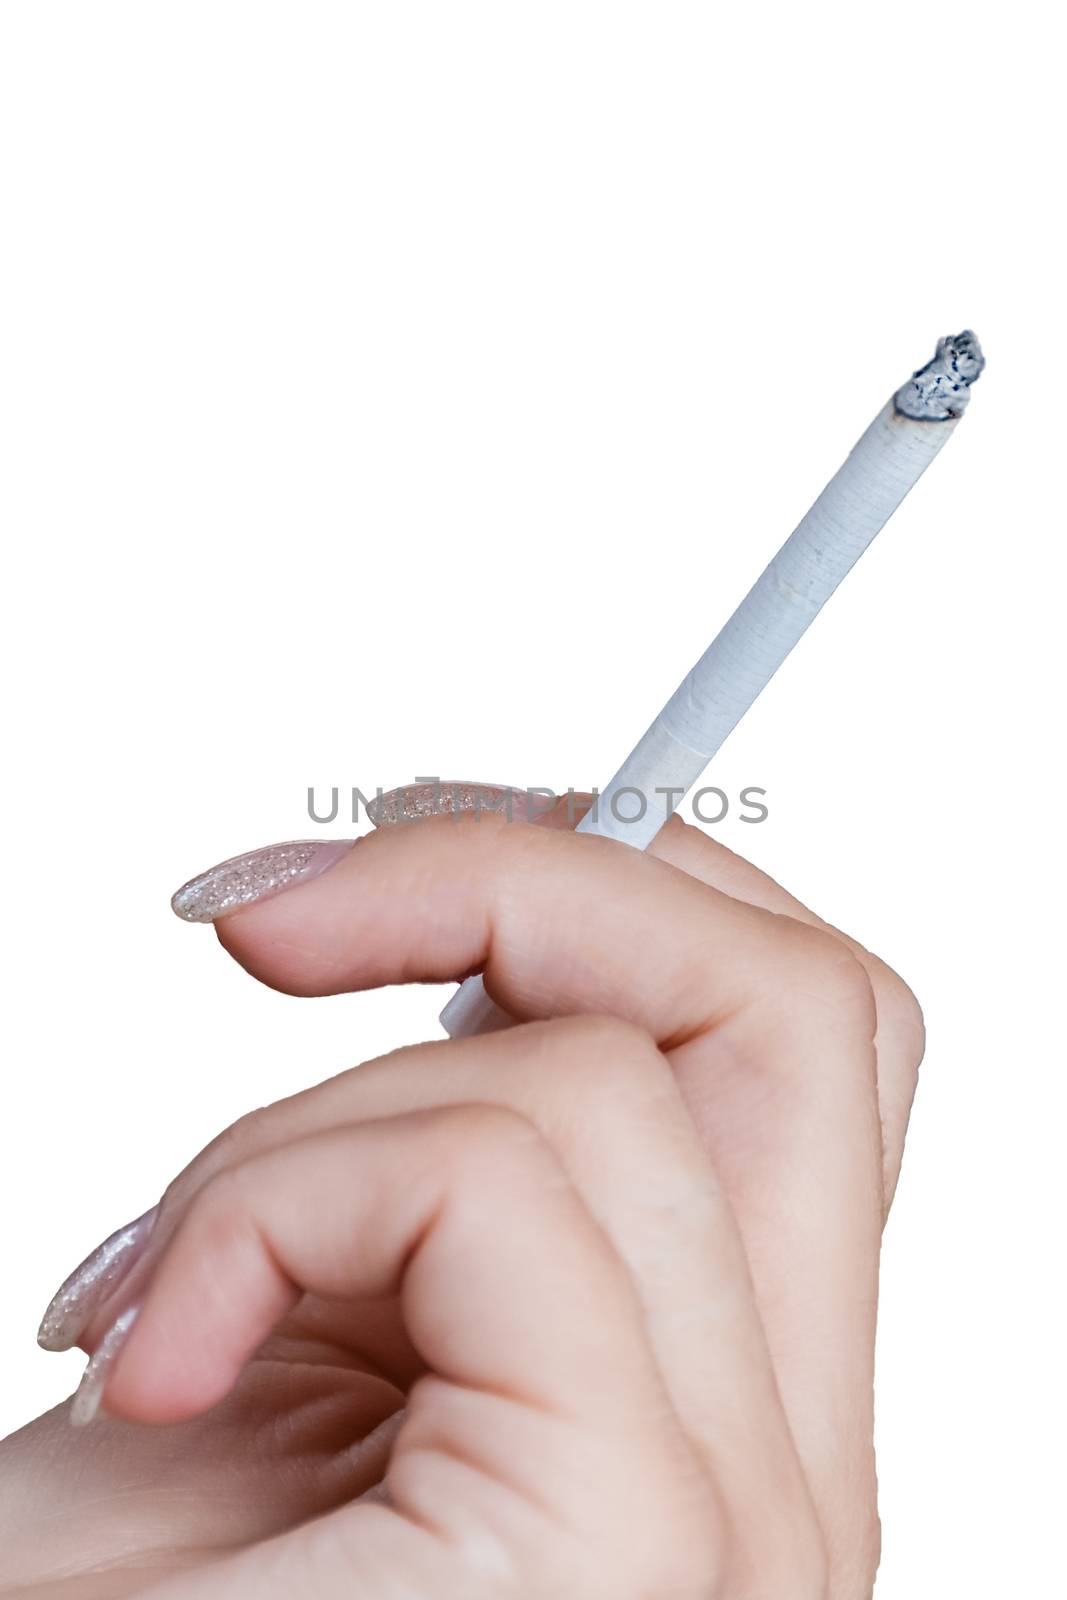 Female Hand holding a cigarette isolated on white background, fingernails nicely manicured, cigarette is lit